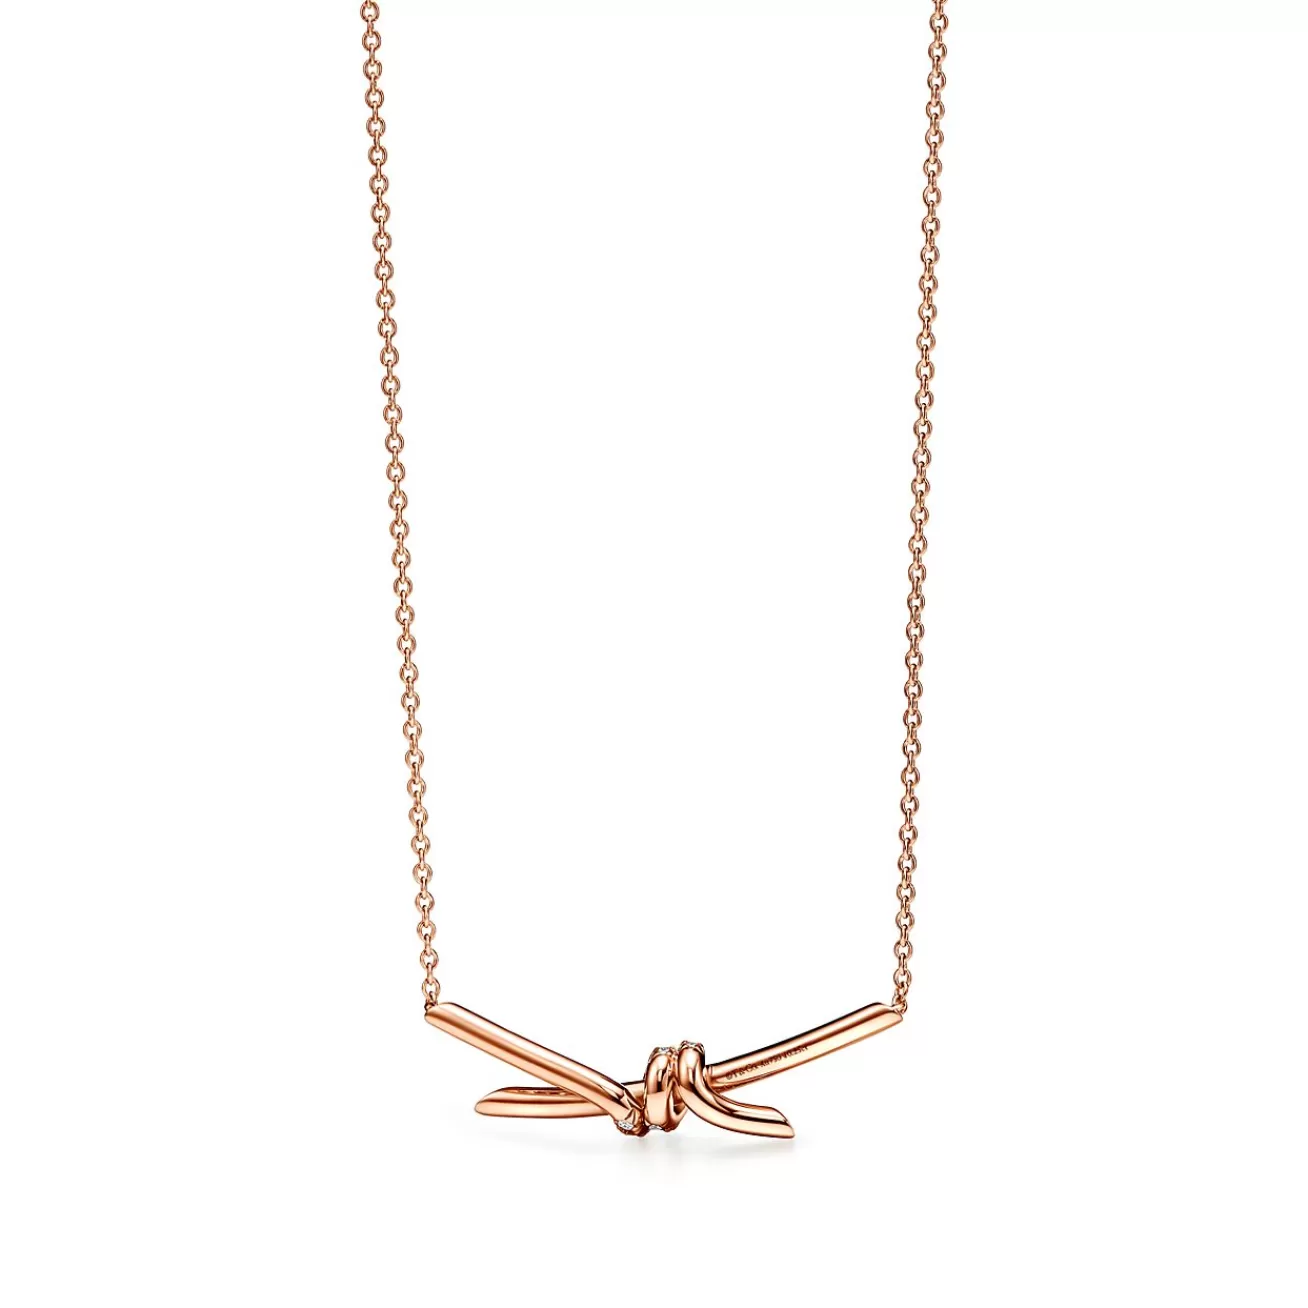 Tiffany & Co. Tiffany Knot Pendant in Rose Gold with Diamonds | ^ Necklaces & Pendants | Gifts for Her